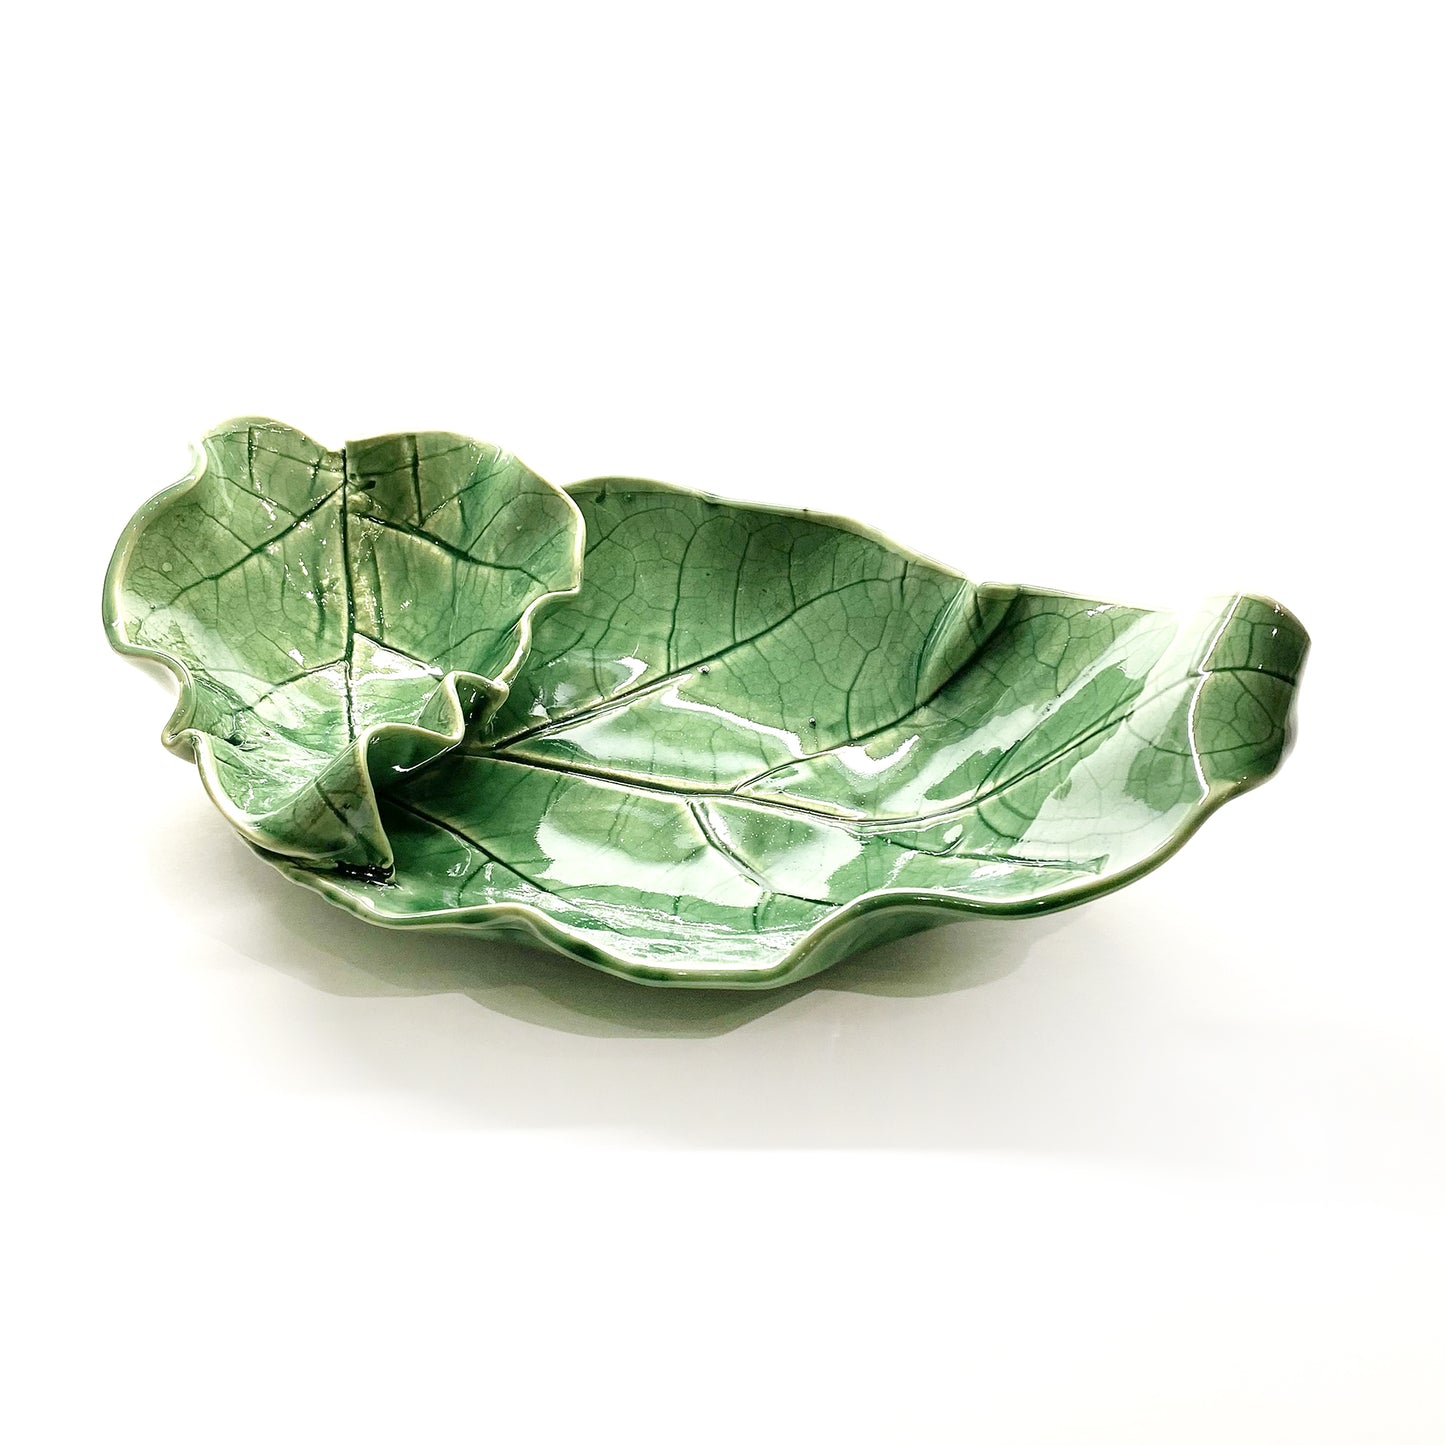 Leaf Chip & Dip Tray Pottery